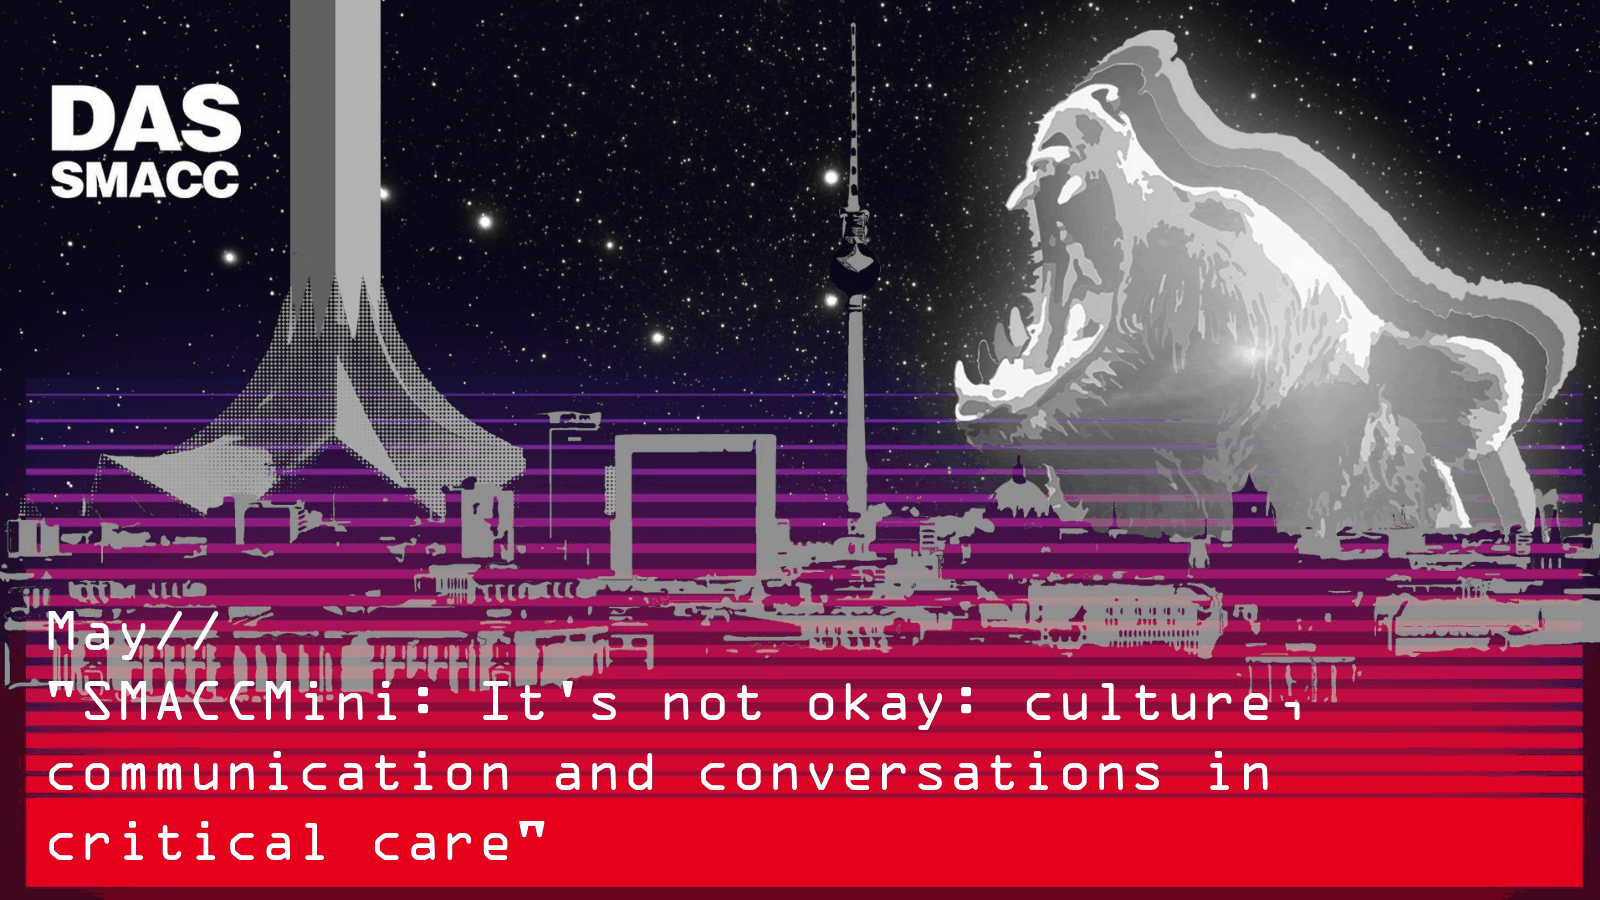 It's not okay: culture, communication and conversations in critical care